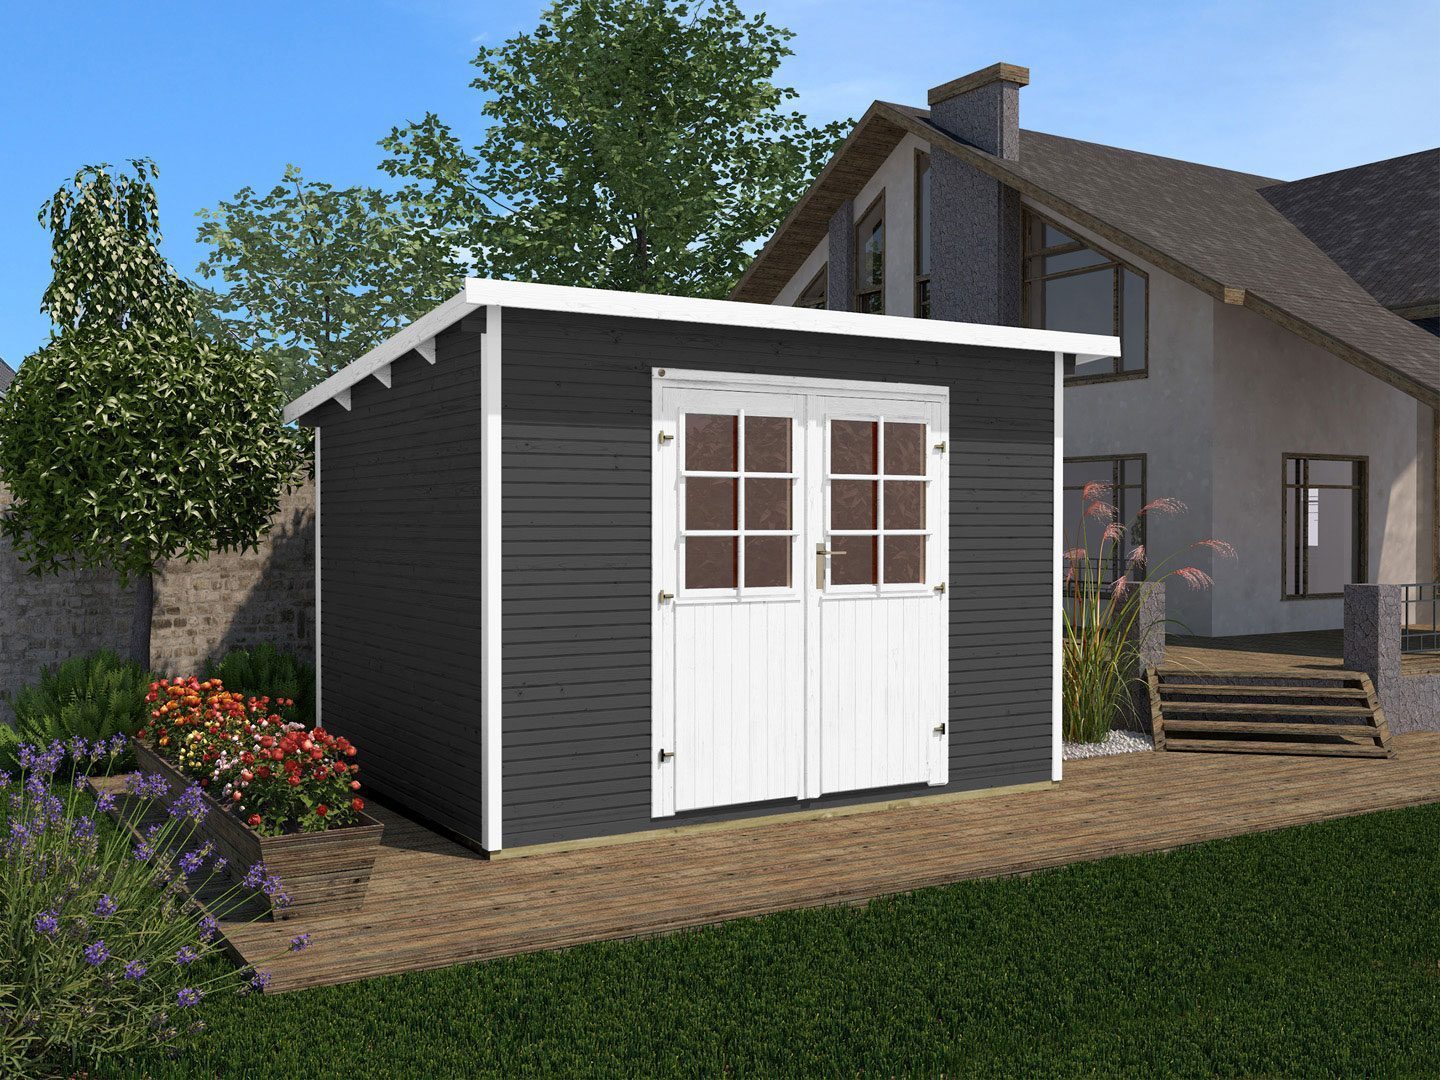 Flat Roof Garden Shed - model 219 in different colours